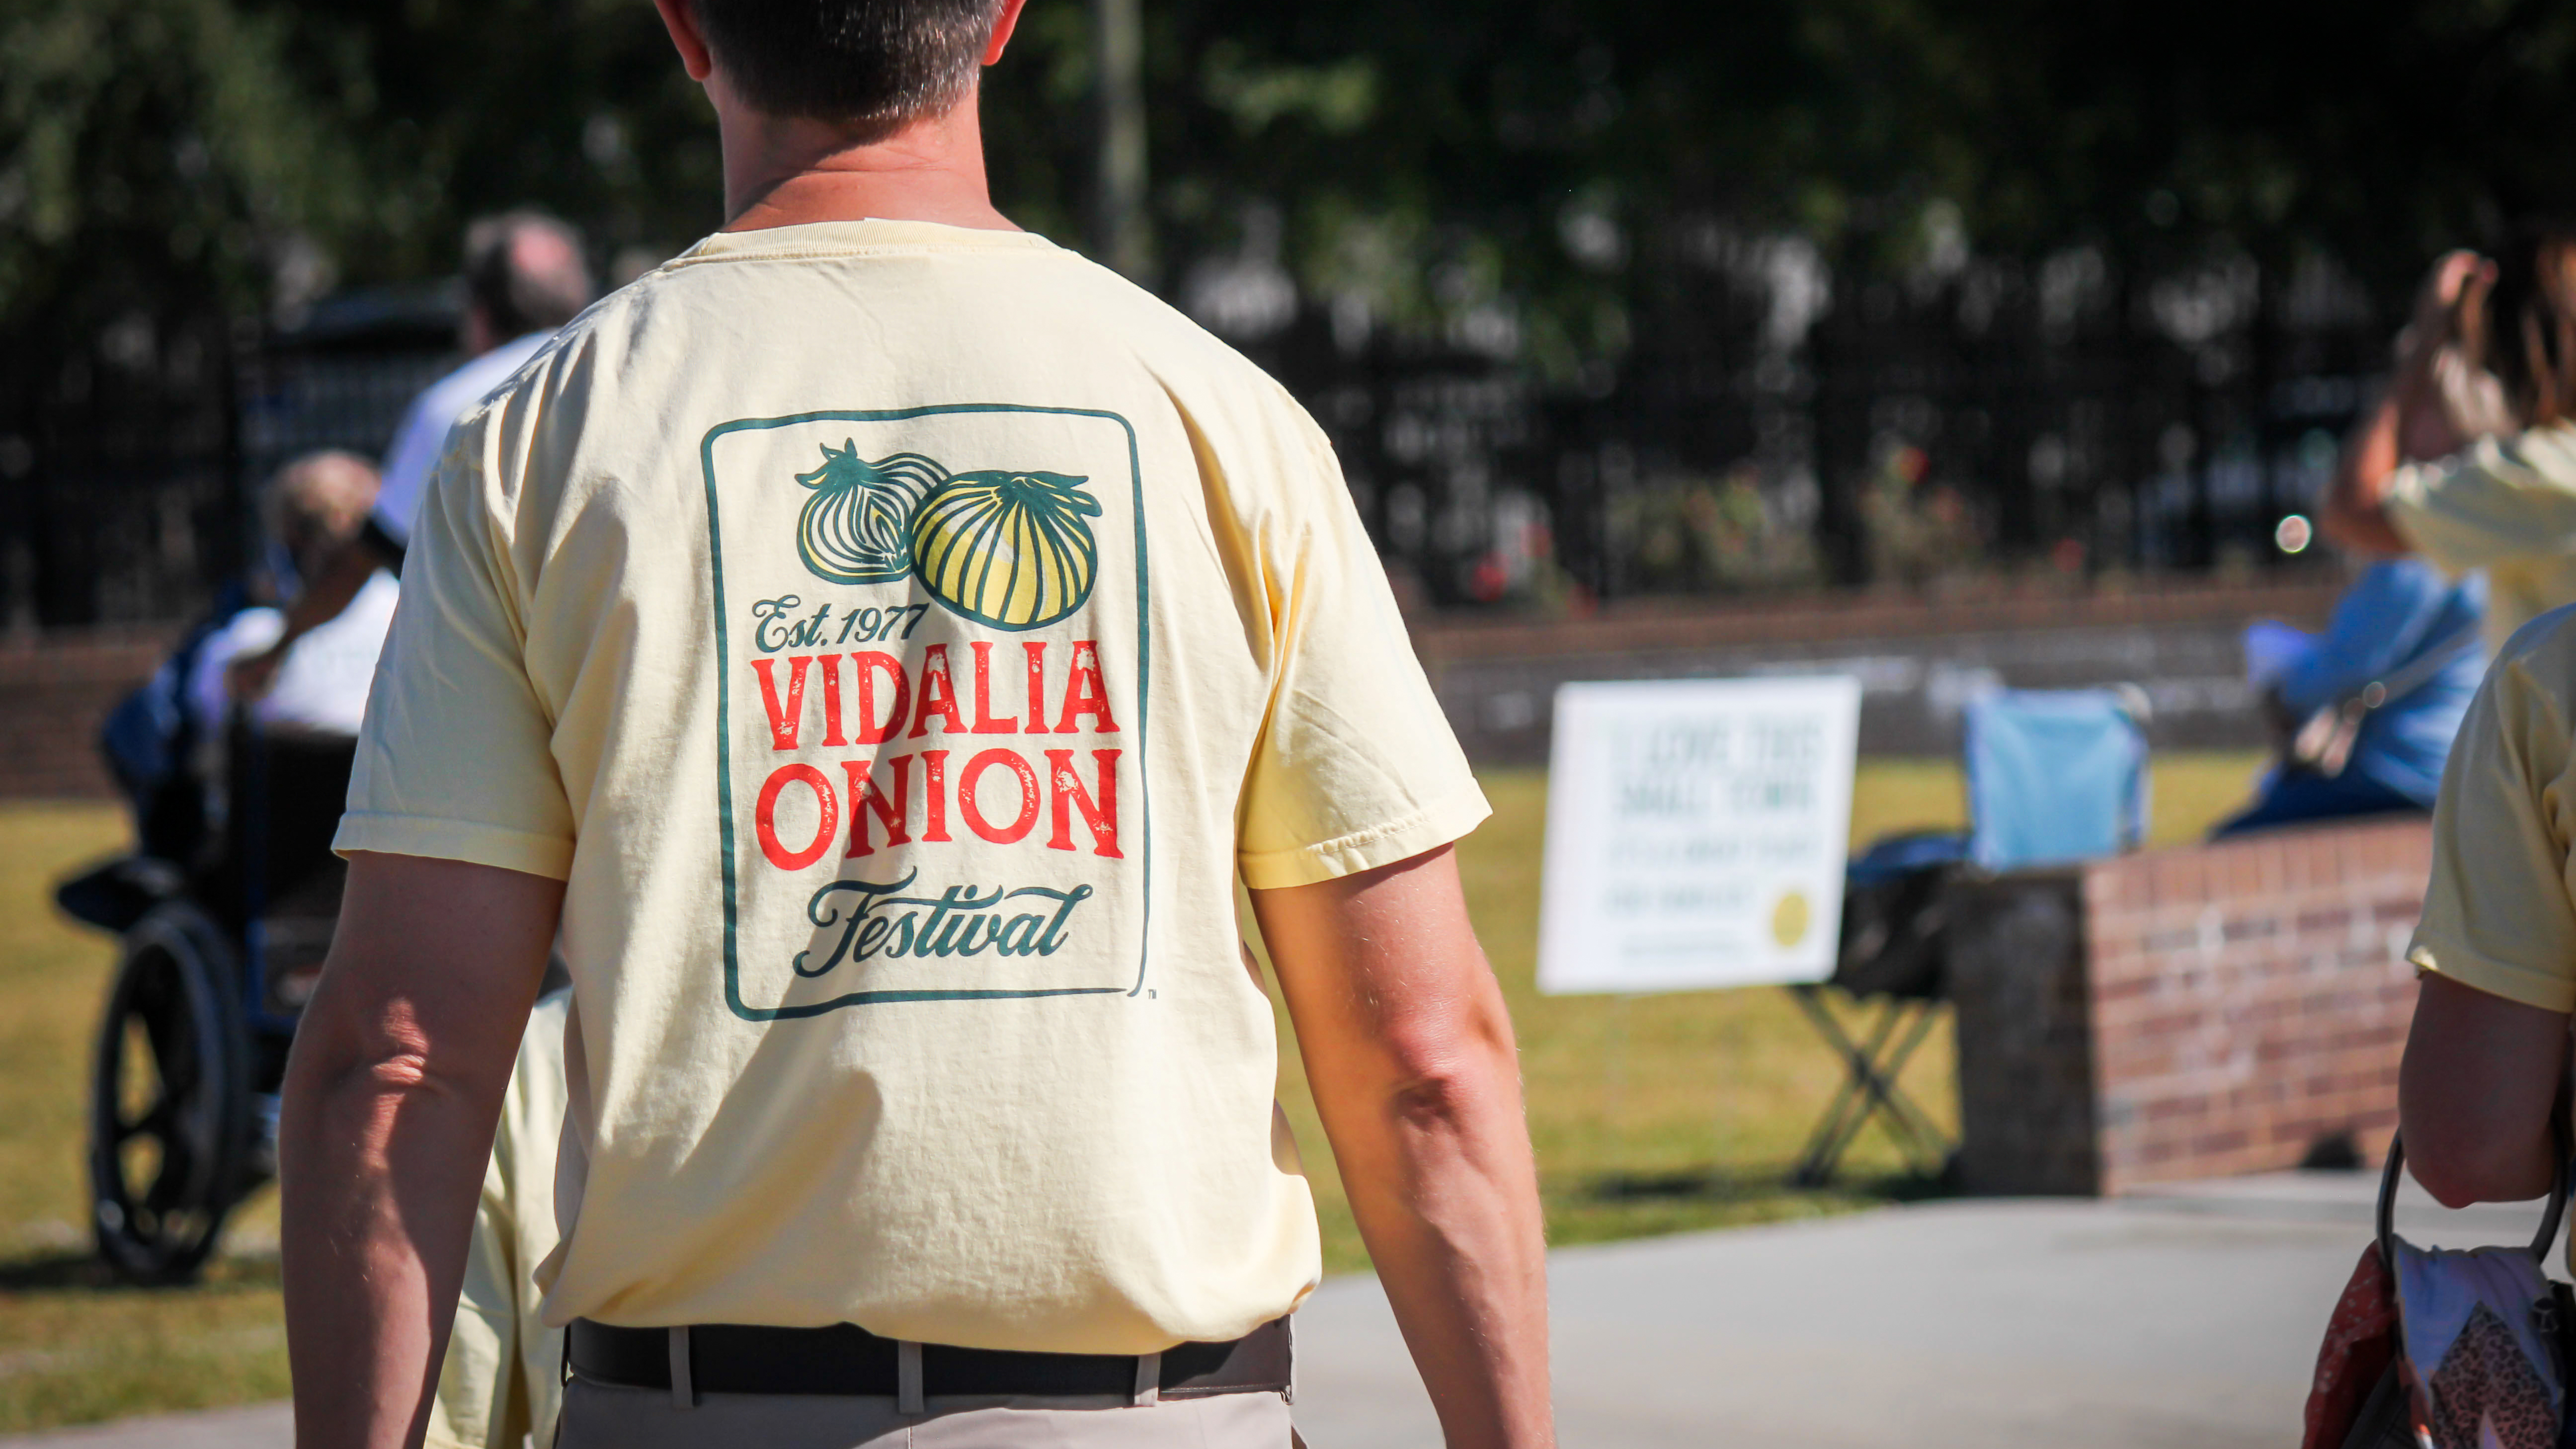 Person wearing a shirt branded for Vidalia